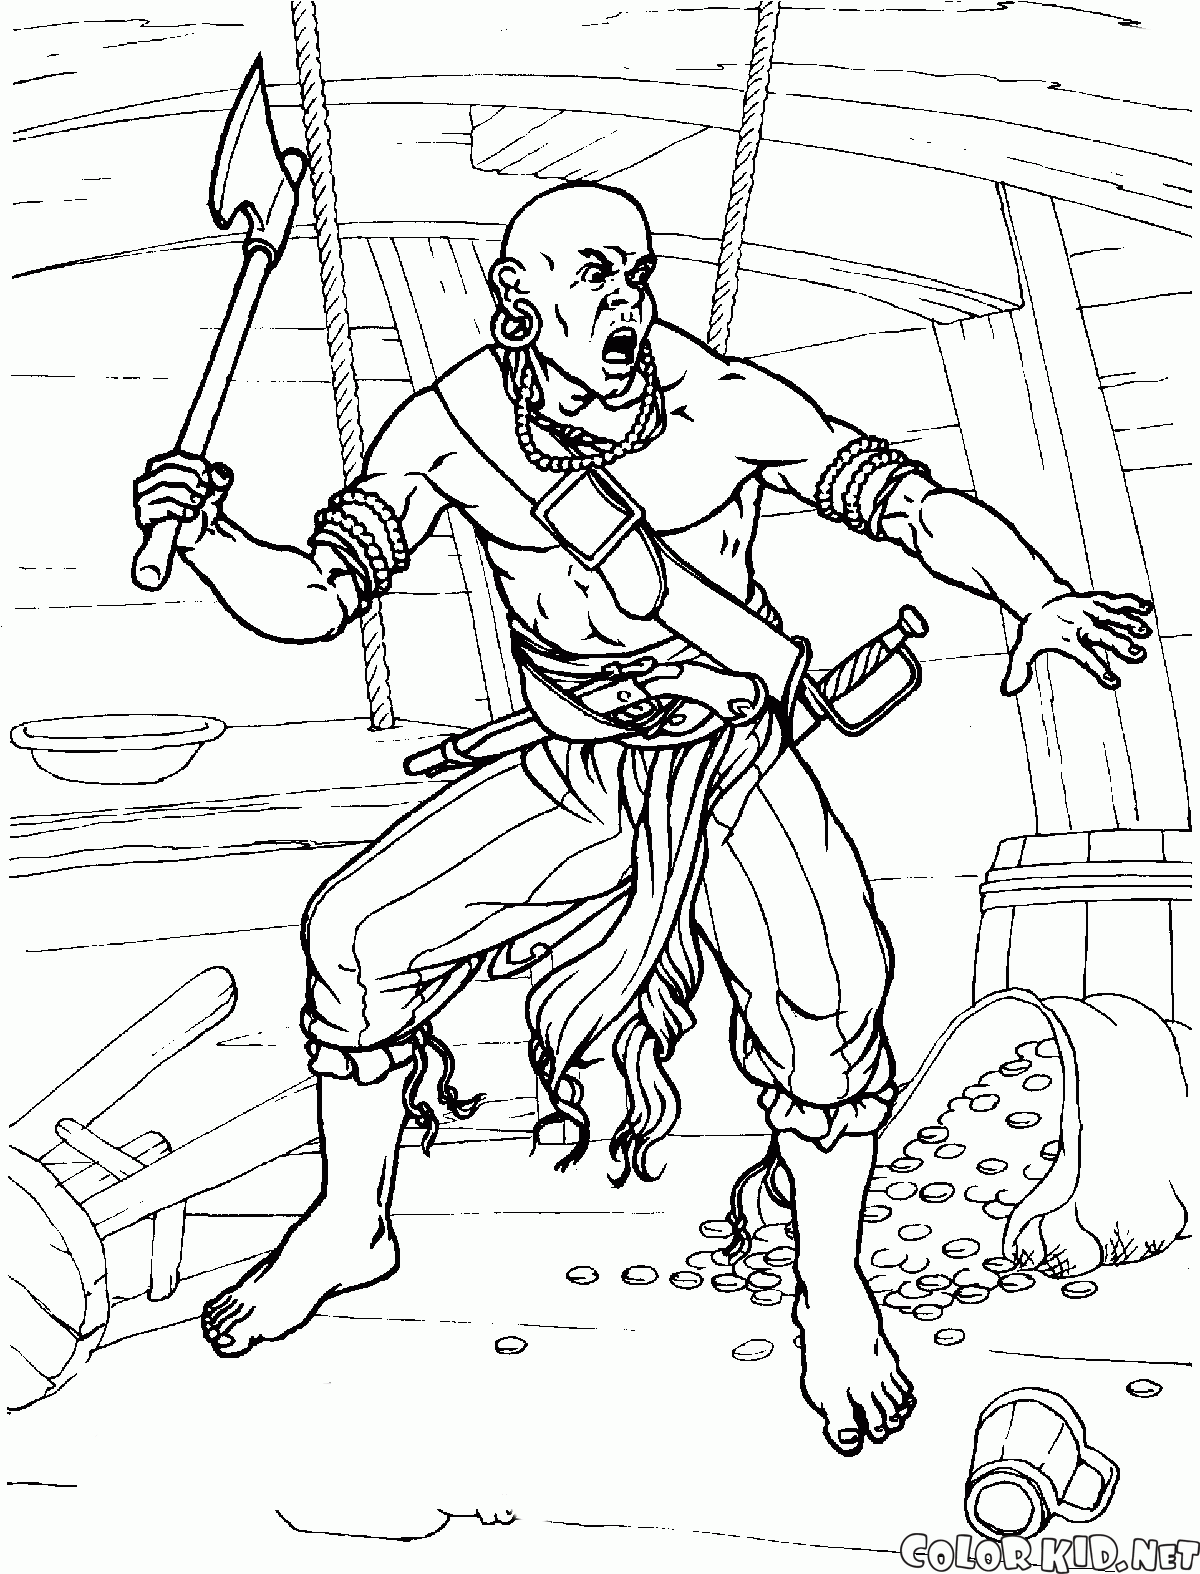 Pirate with an ax